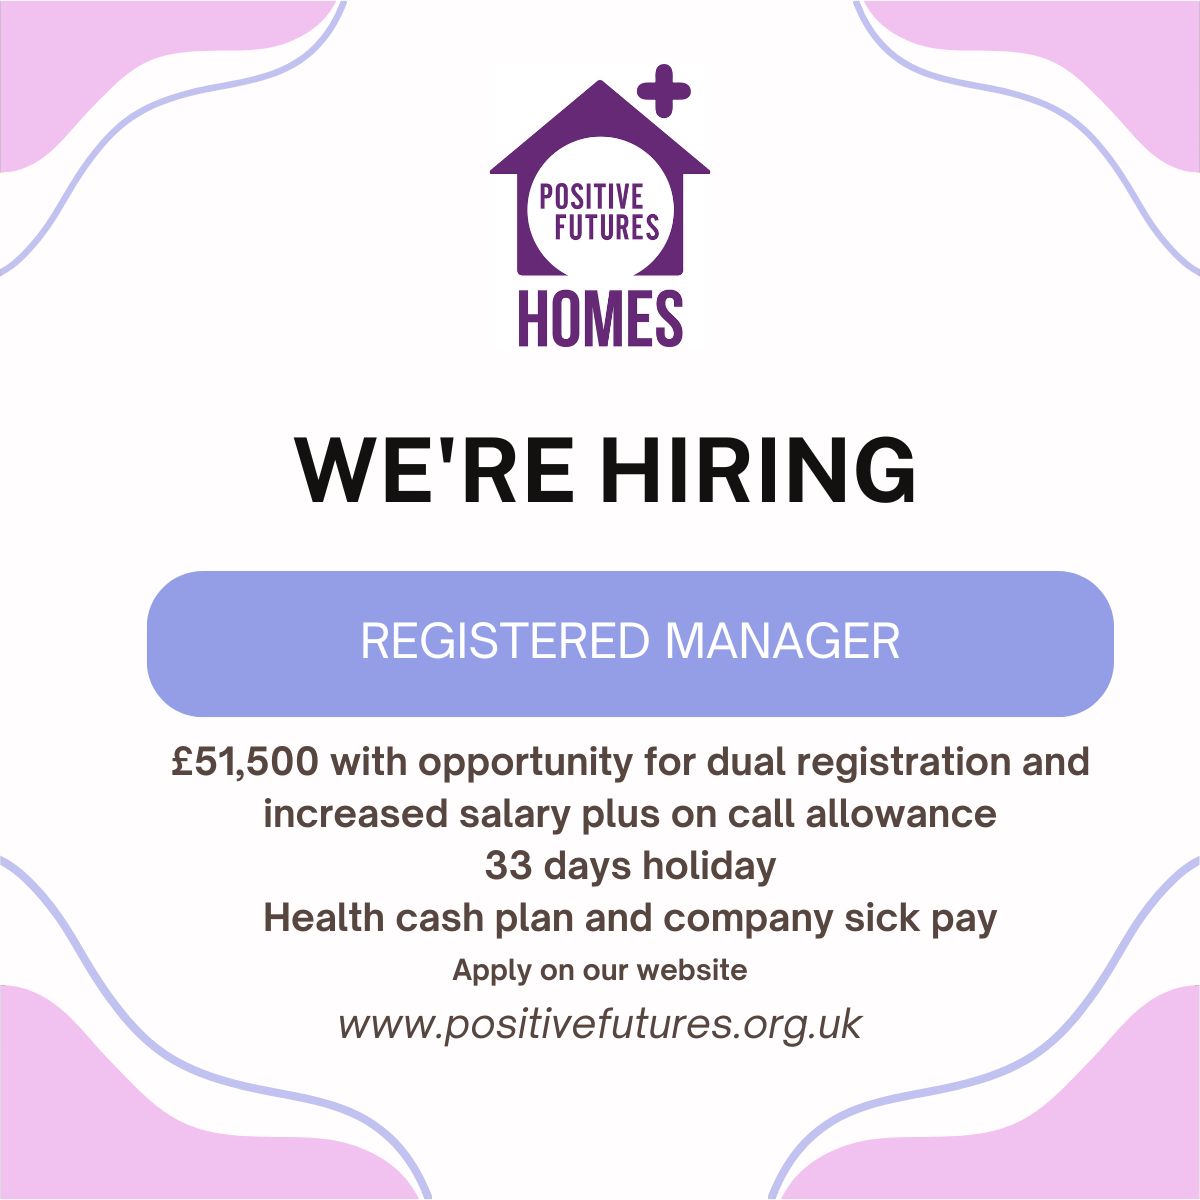 We're hiring! Want to join the Positive Futures Homes team? We have to new vacancies - Residential Care Worker and Registered Manager. Find out more and apply today on our website: positivefutures.org.uk/job-type/pf-ho… #job #liverpool #youth #vacancy #youngpeople #charity #care